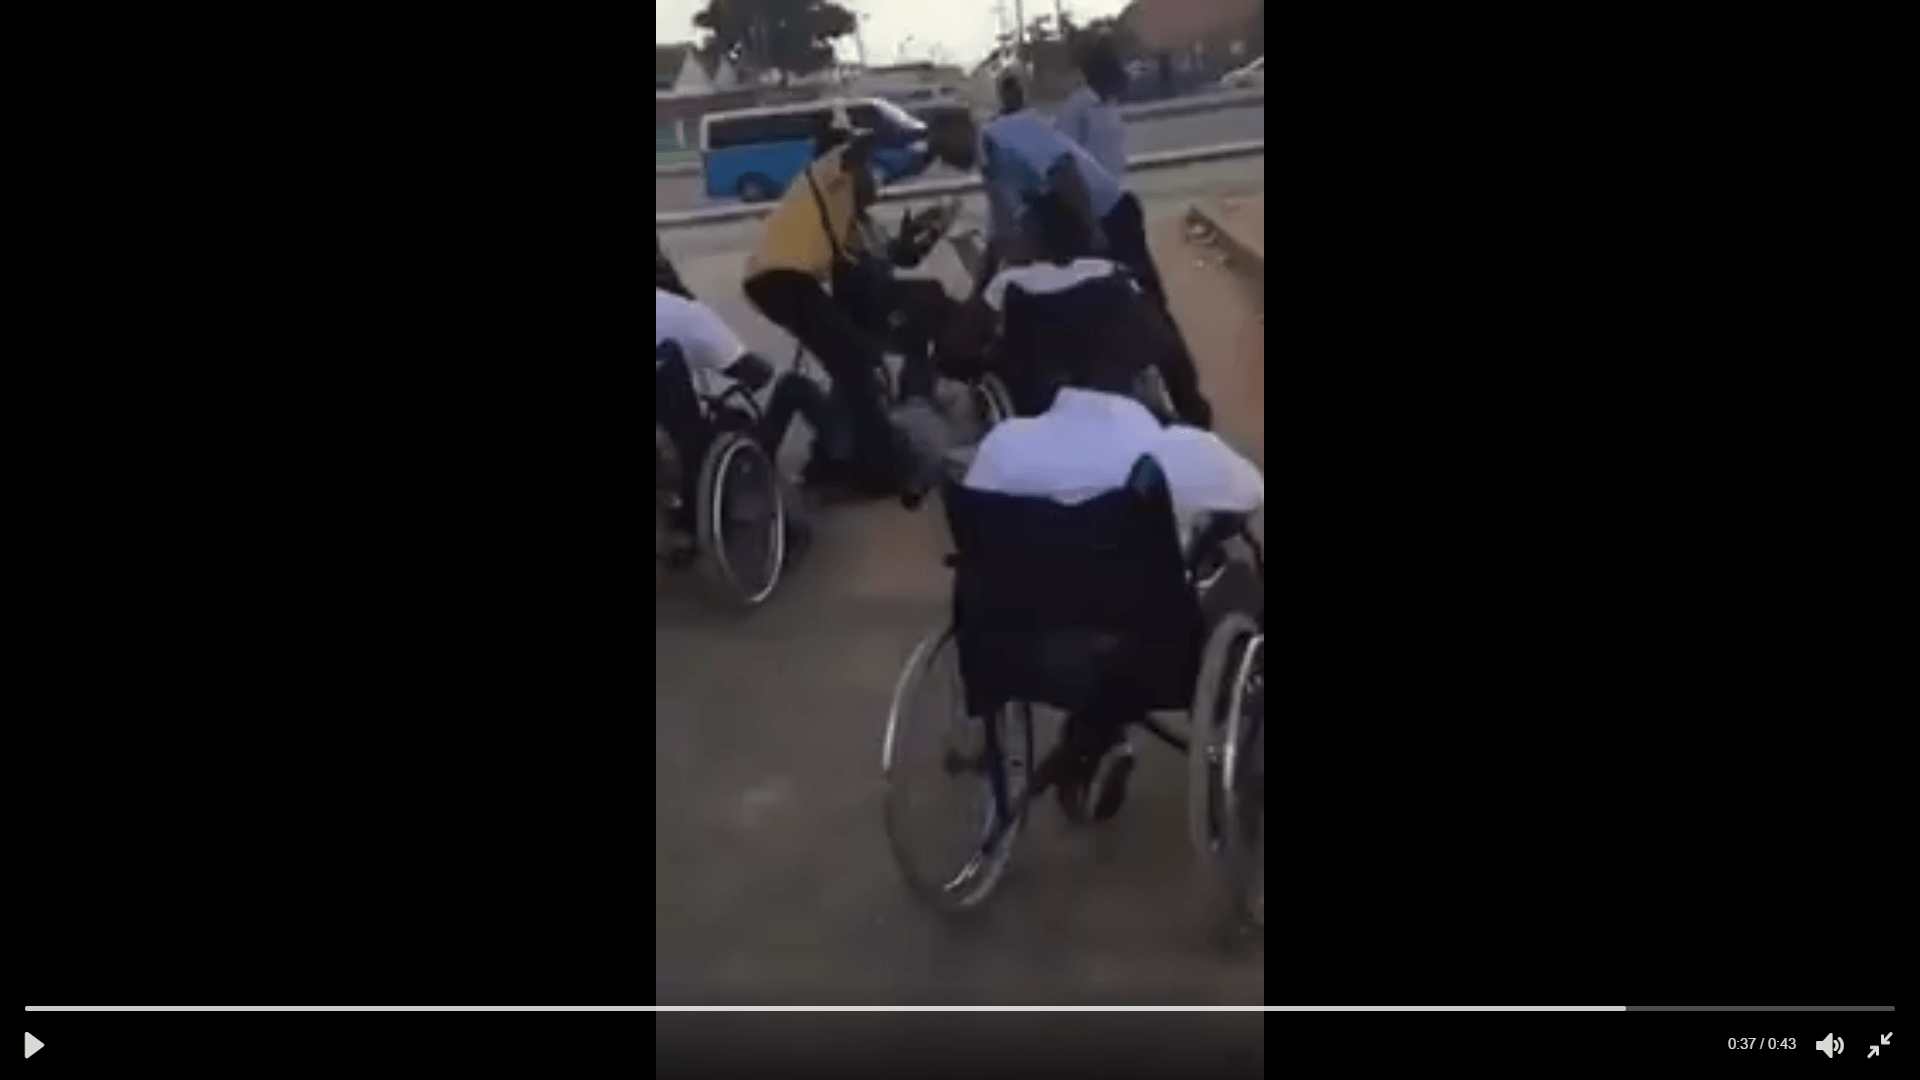 Video footage showing an Angolan police officer beating a peaceful protester in a wheelchair, Luanda, Angola, April 22, 2017.